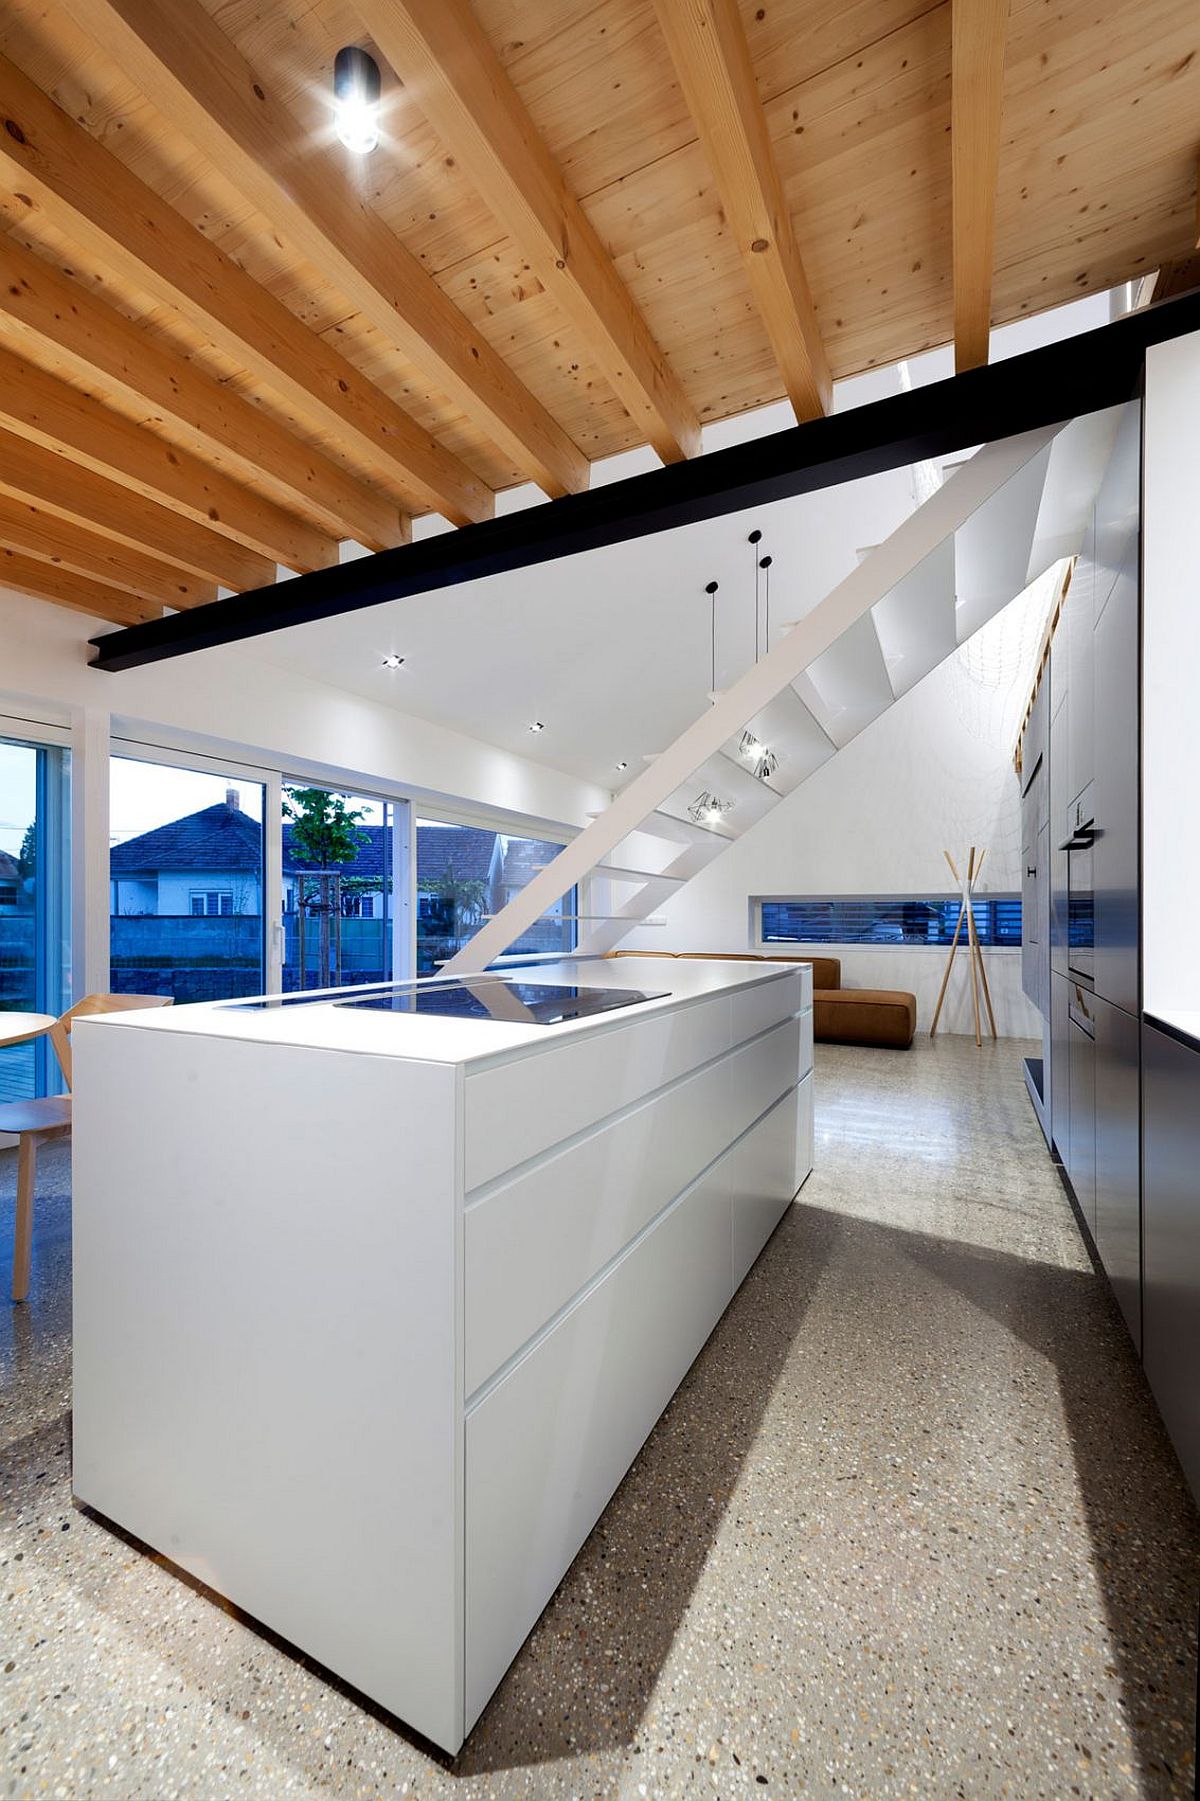 White kitchen island and dark kitchen wall in the open plan living area